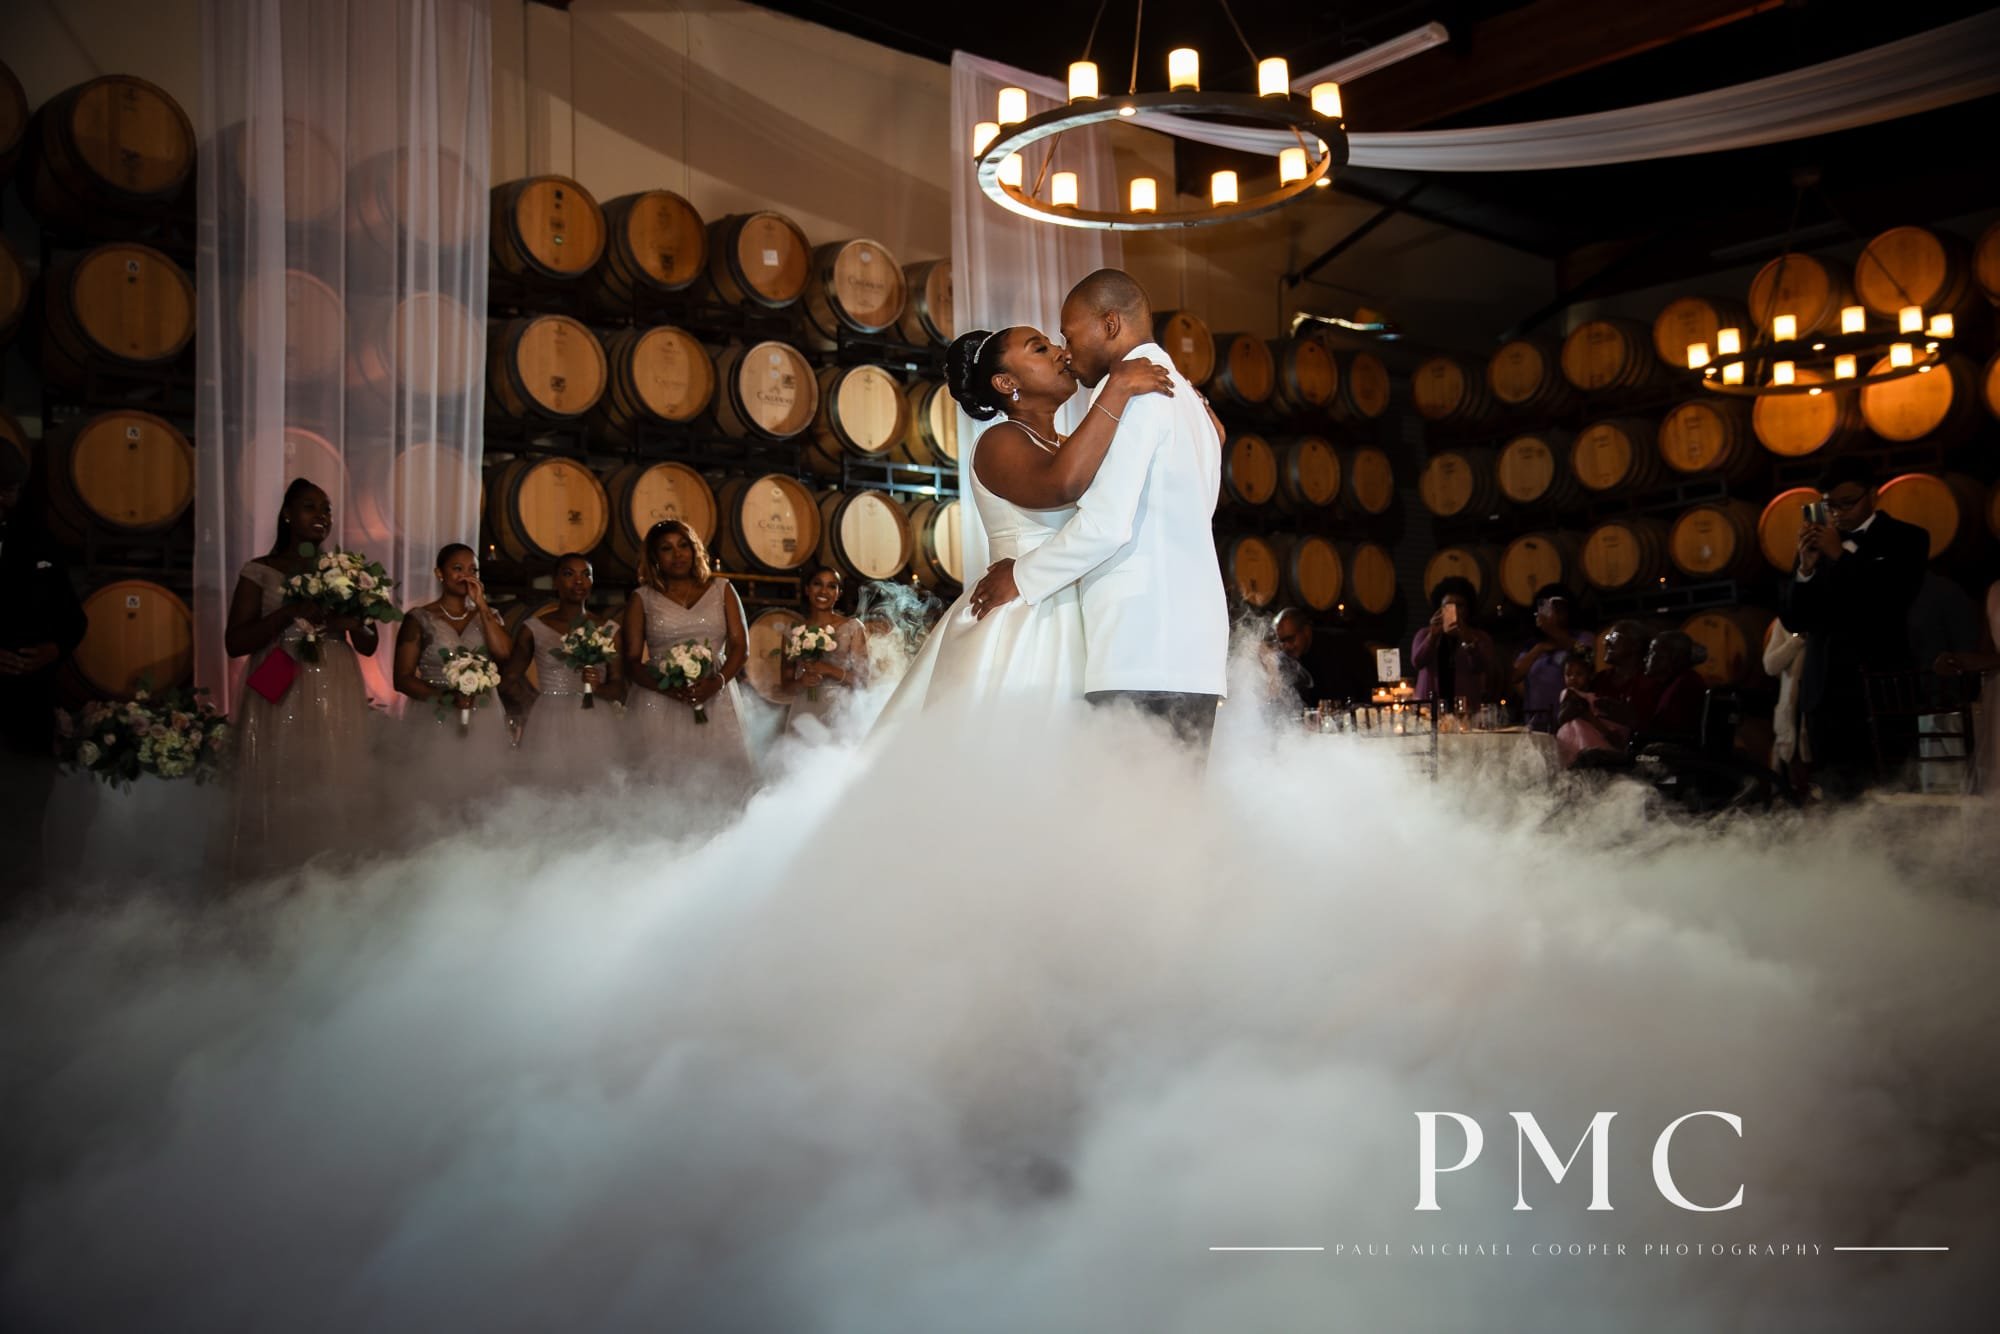 A bride and groom kiss during their first dance in the barrel room at their wedding reception.